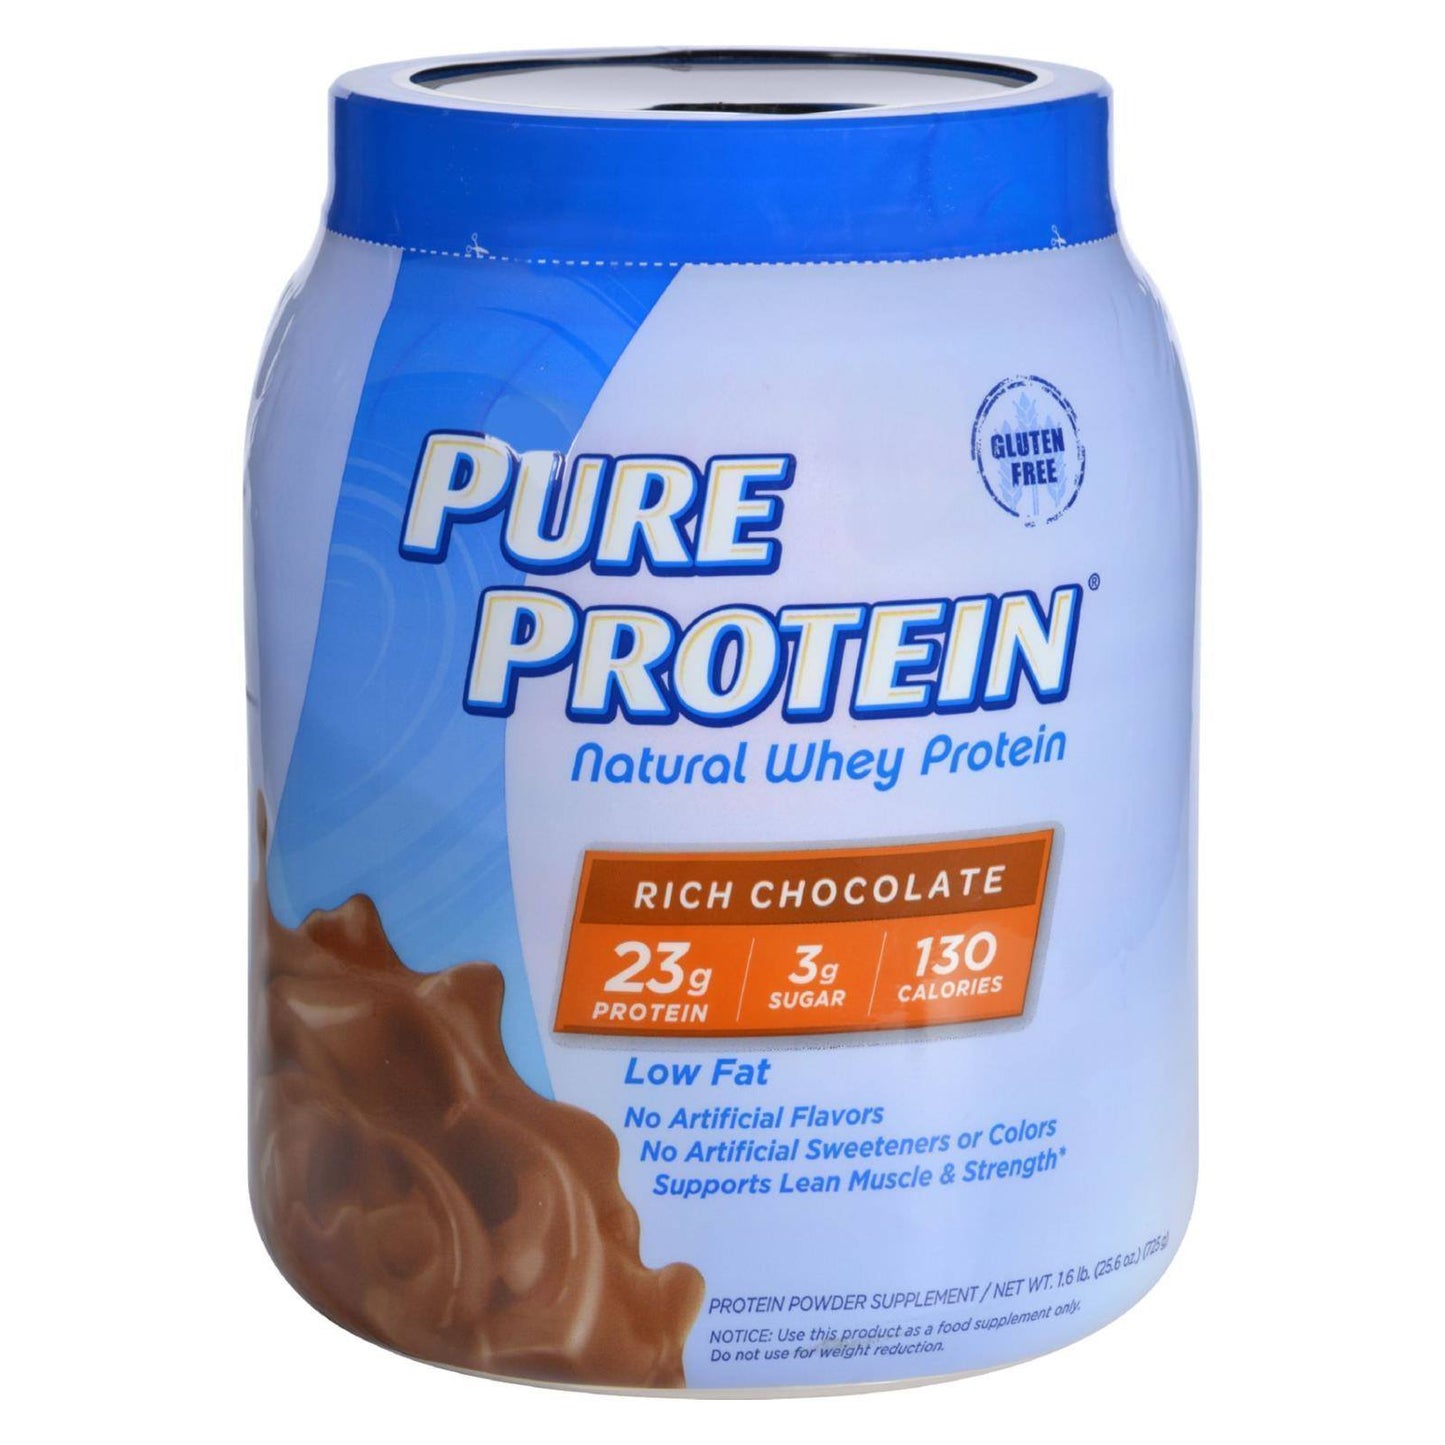 Pure Protein Whey Protein - 100 Percent Natural - Rich Chocolate - 1.6 lb